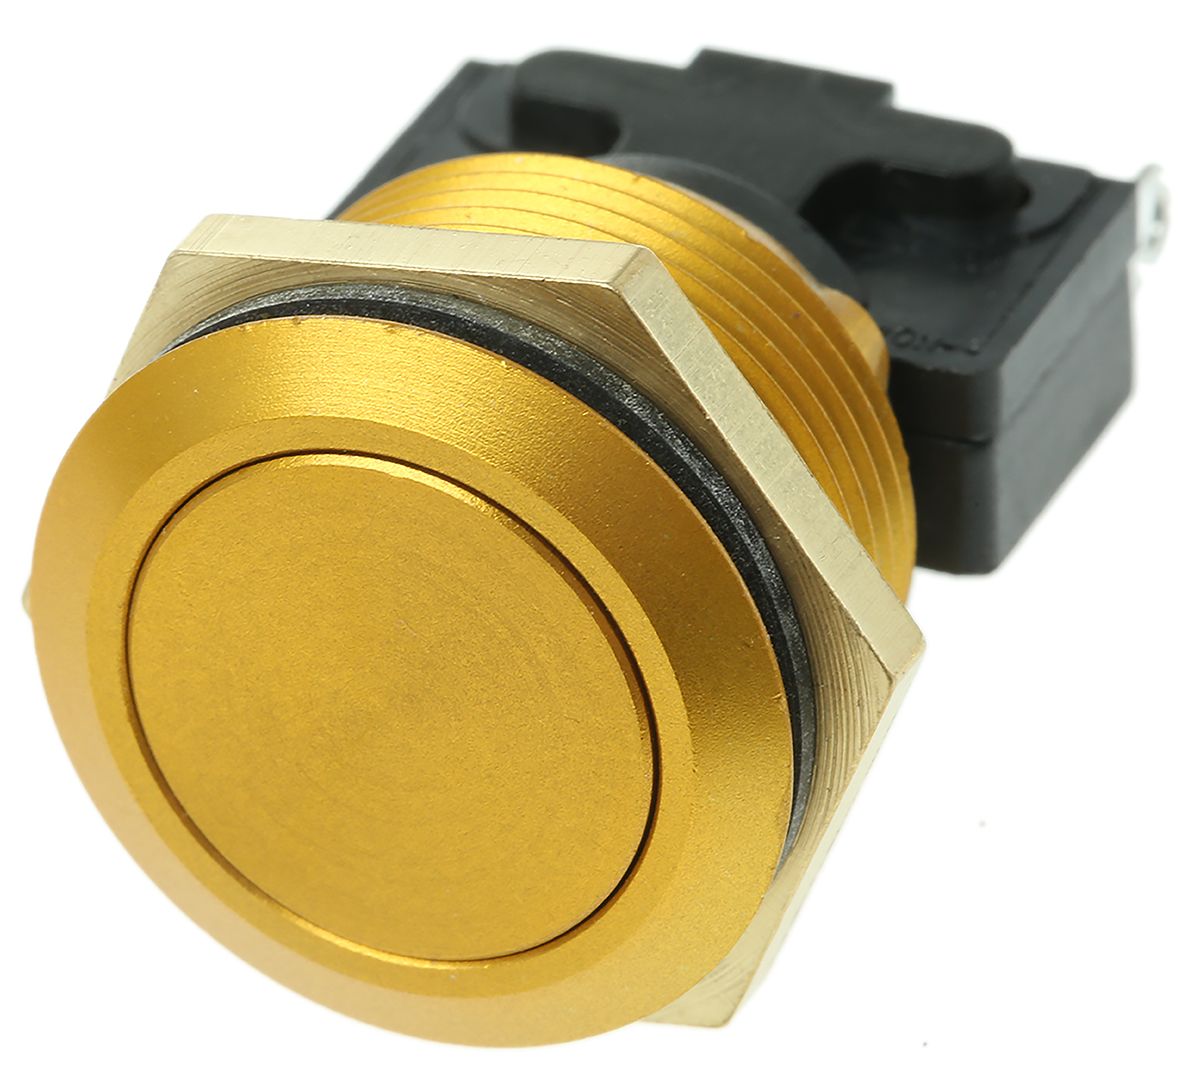 ITW Switches 76-95 Series Momentary Push Button Switch, Panel Mount, SPDT, 19.2mm Cutout, 250V ac, IP67